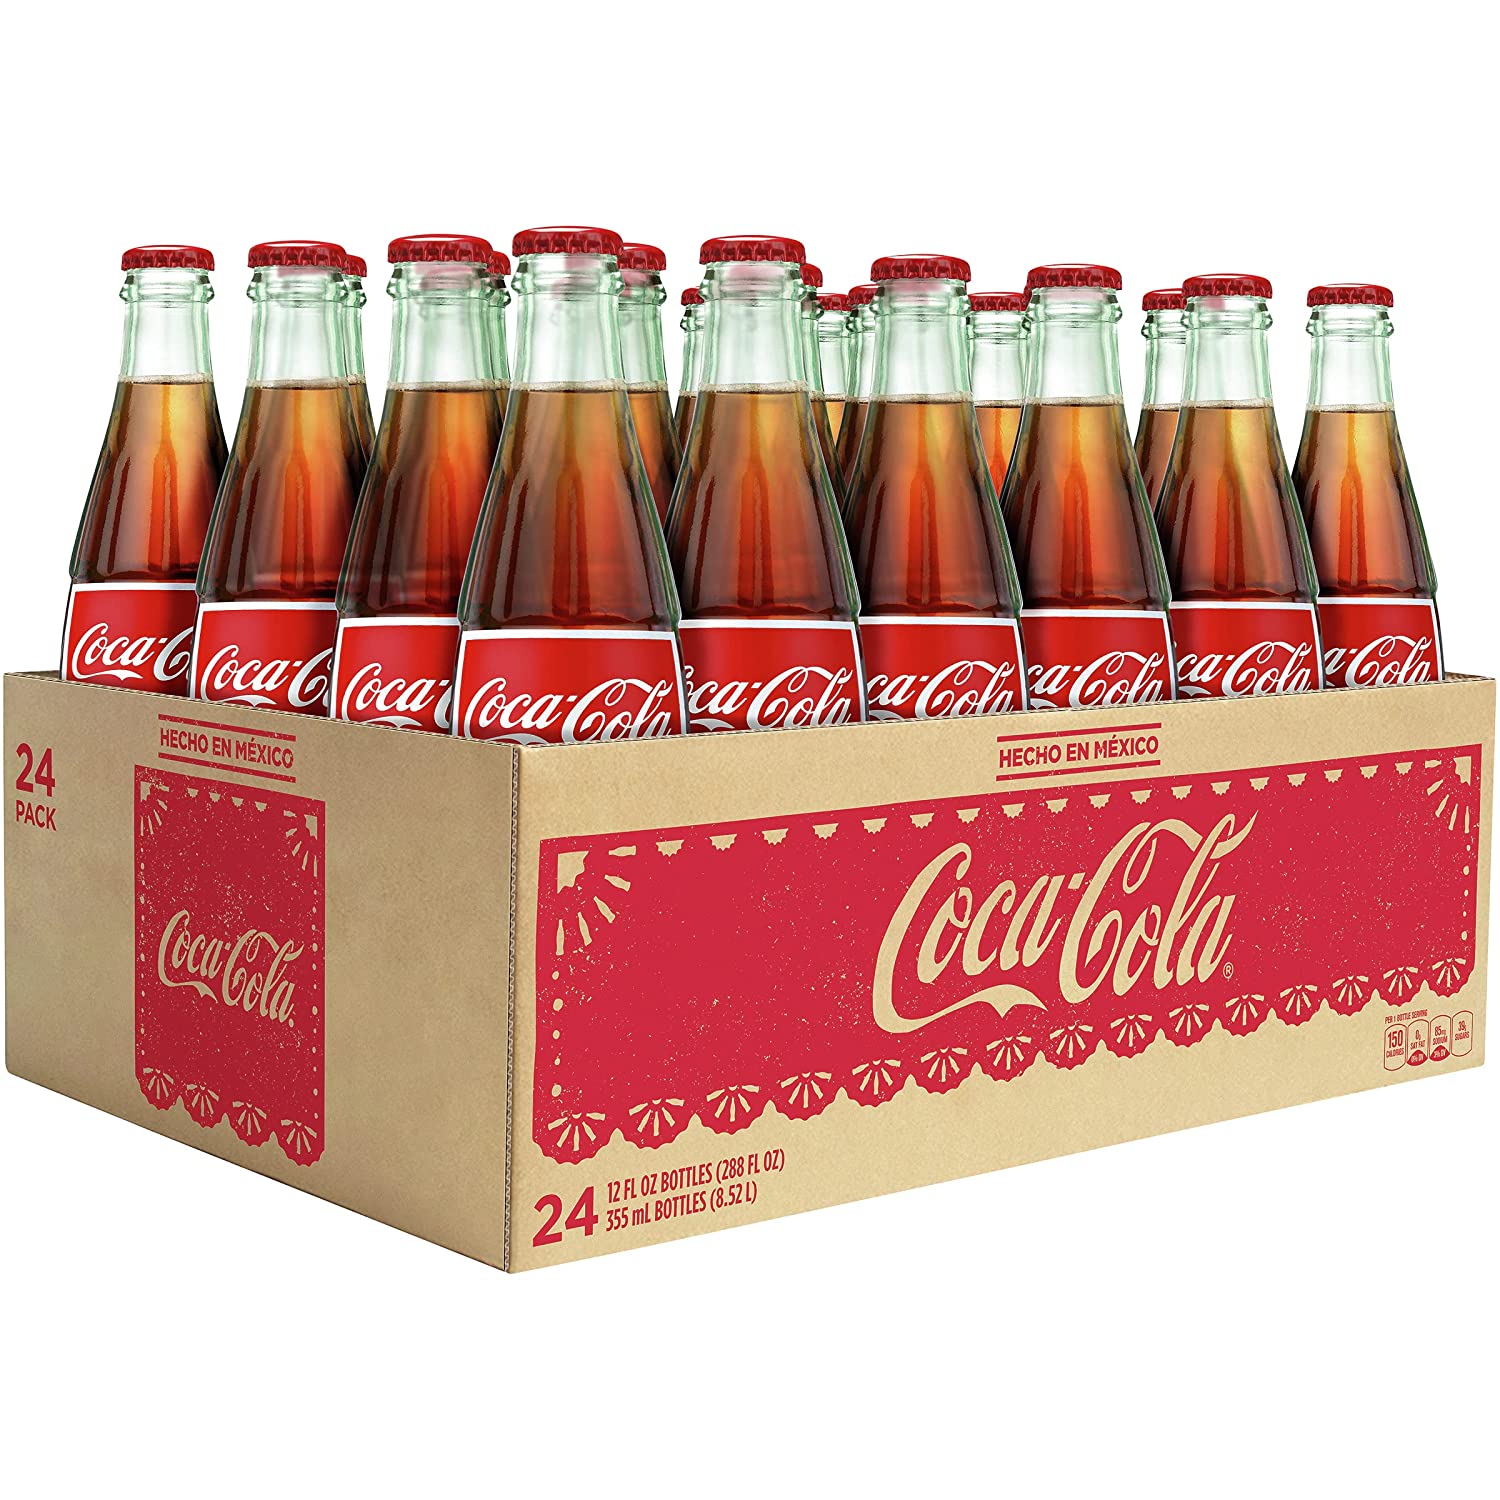 24-Pack Coca-Cola made with Cane Sugar